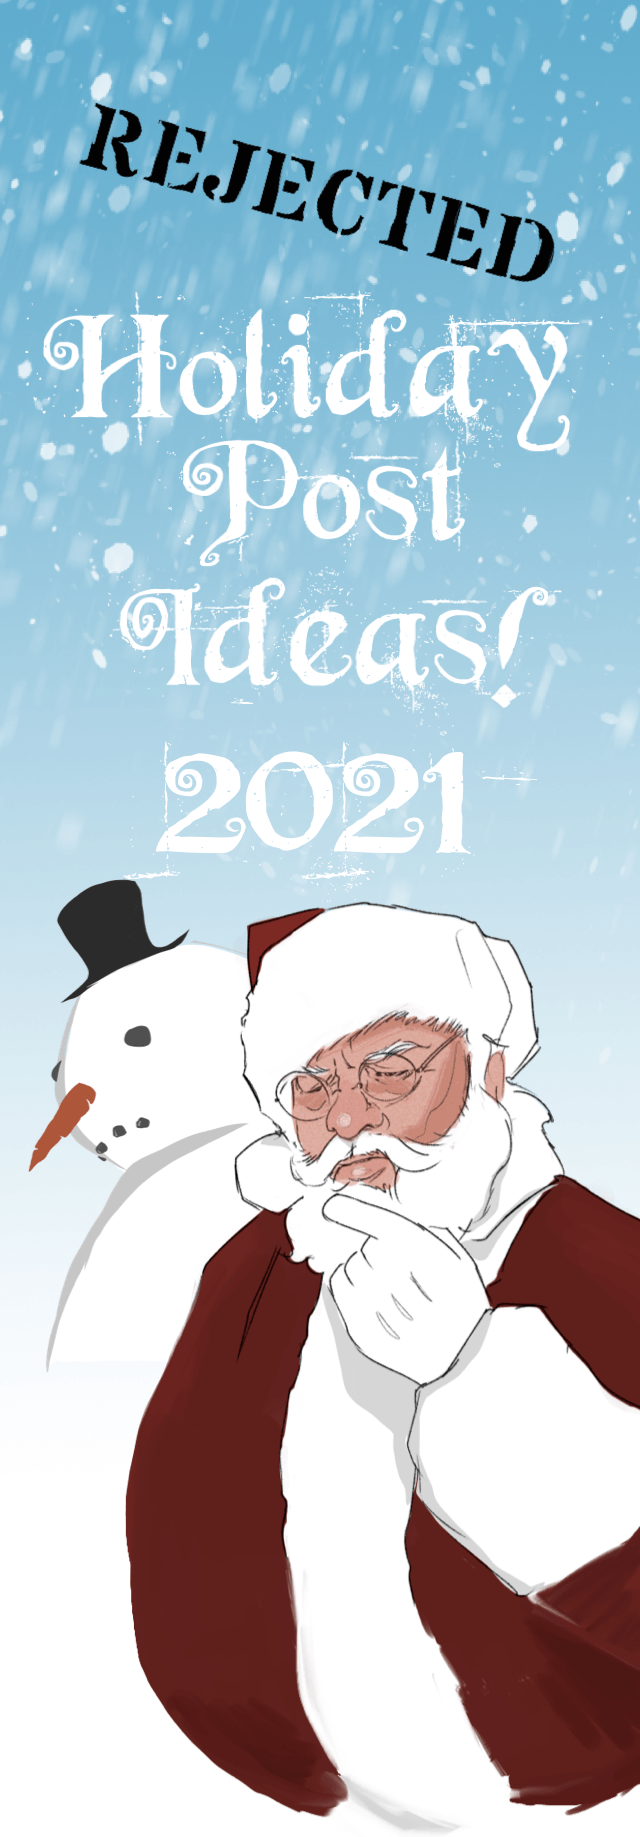 Rejected Holiday Post Ideas! 2021